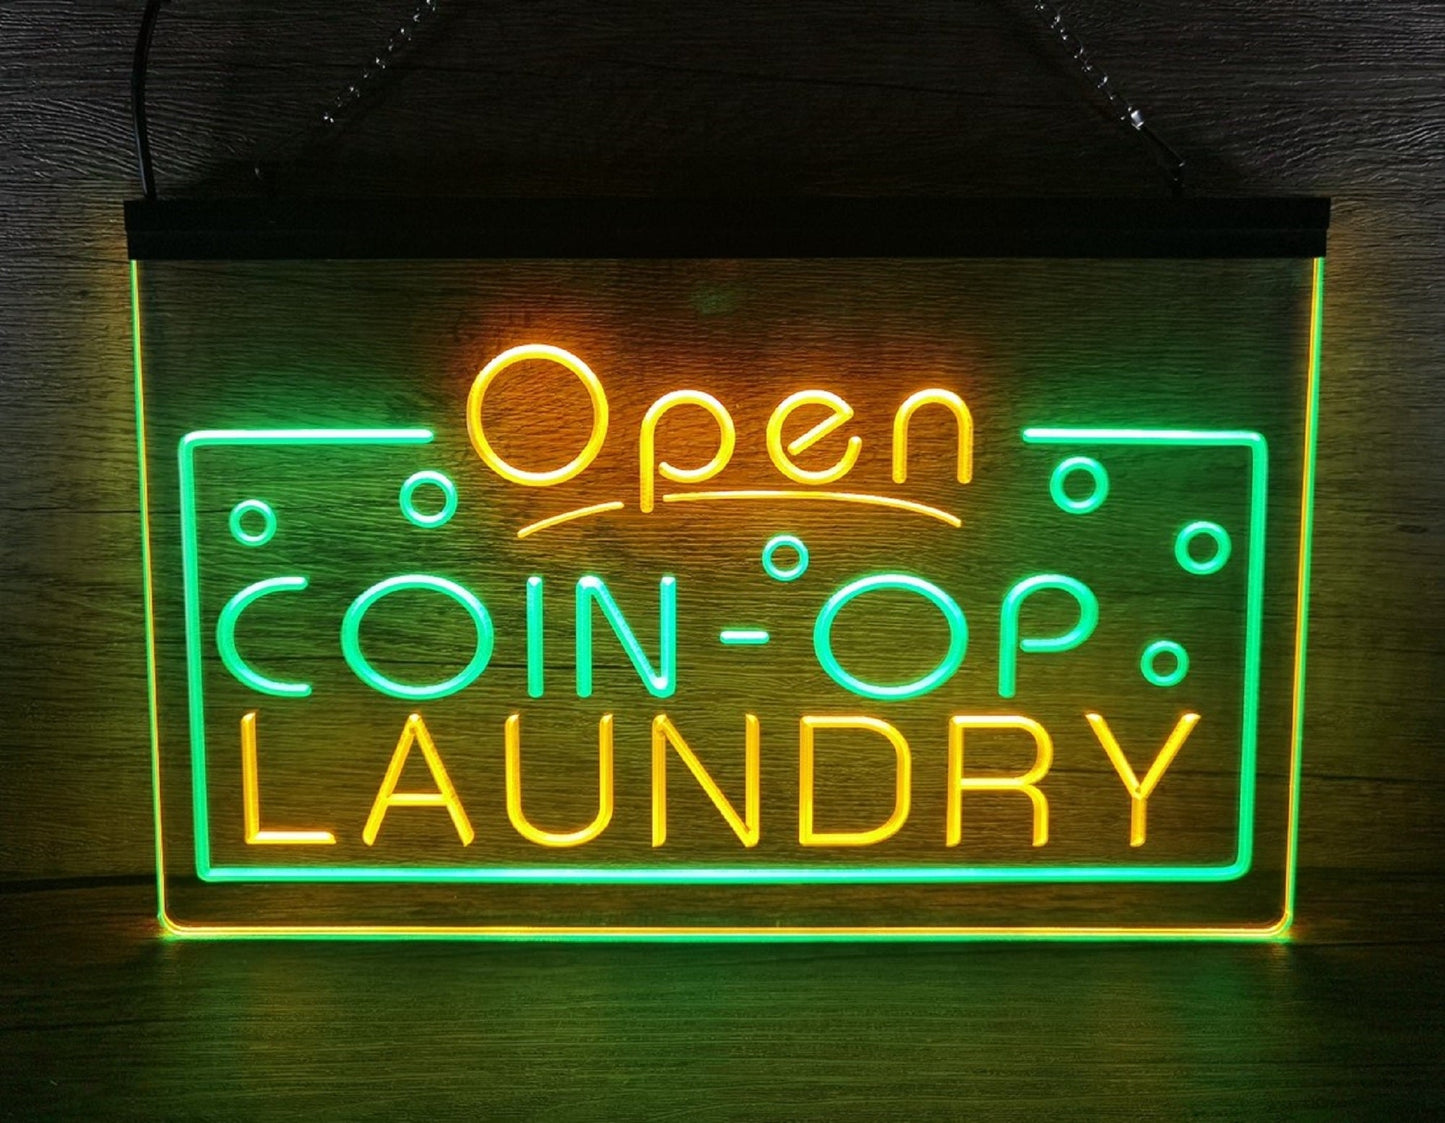 Neon Sign Dual Color Open Coin-op Laundry Wall Desktop Decor Free Shipping